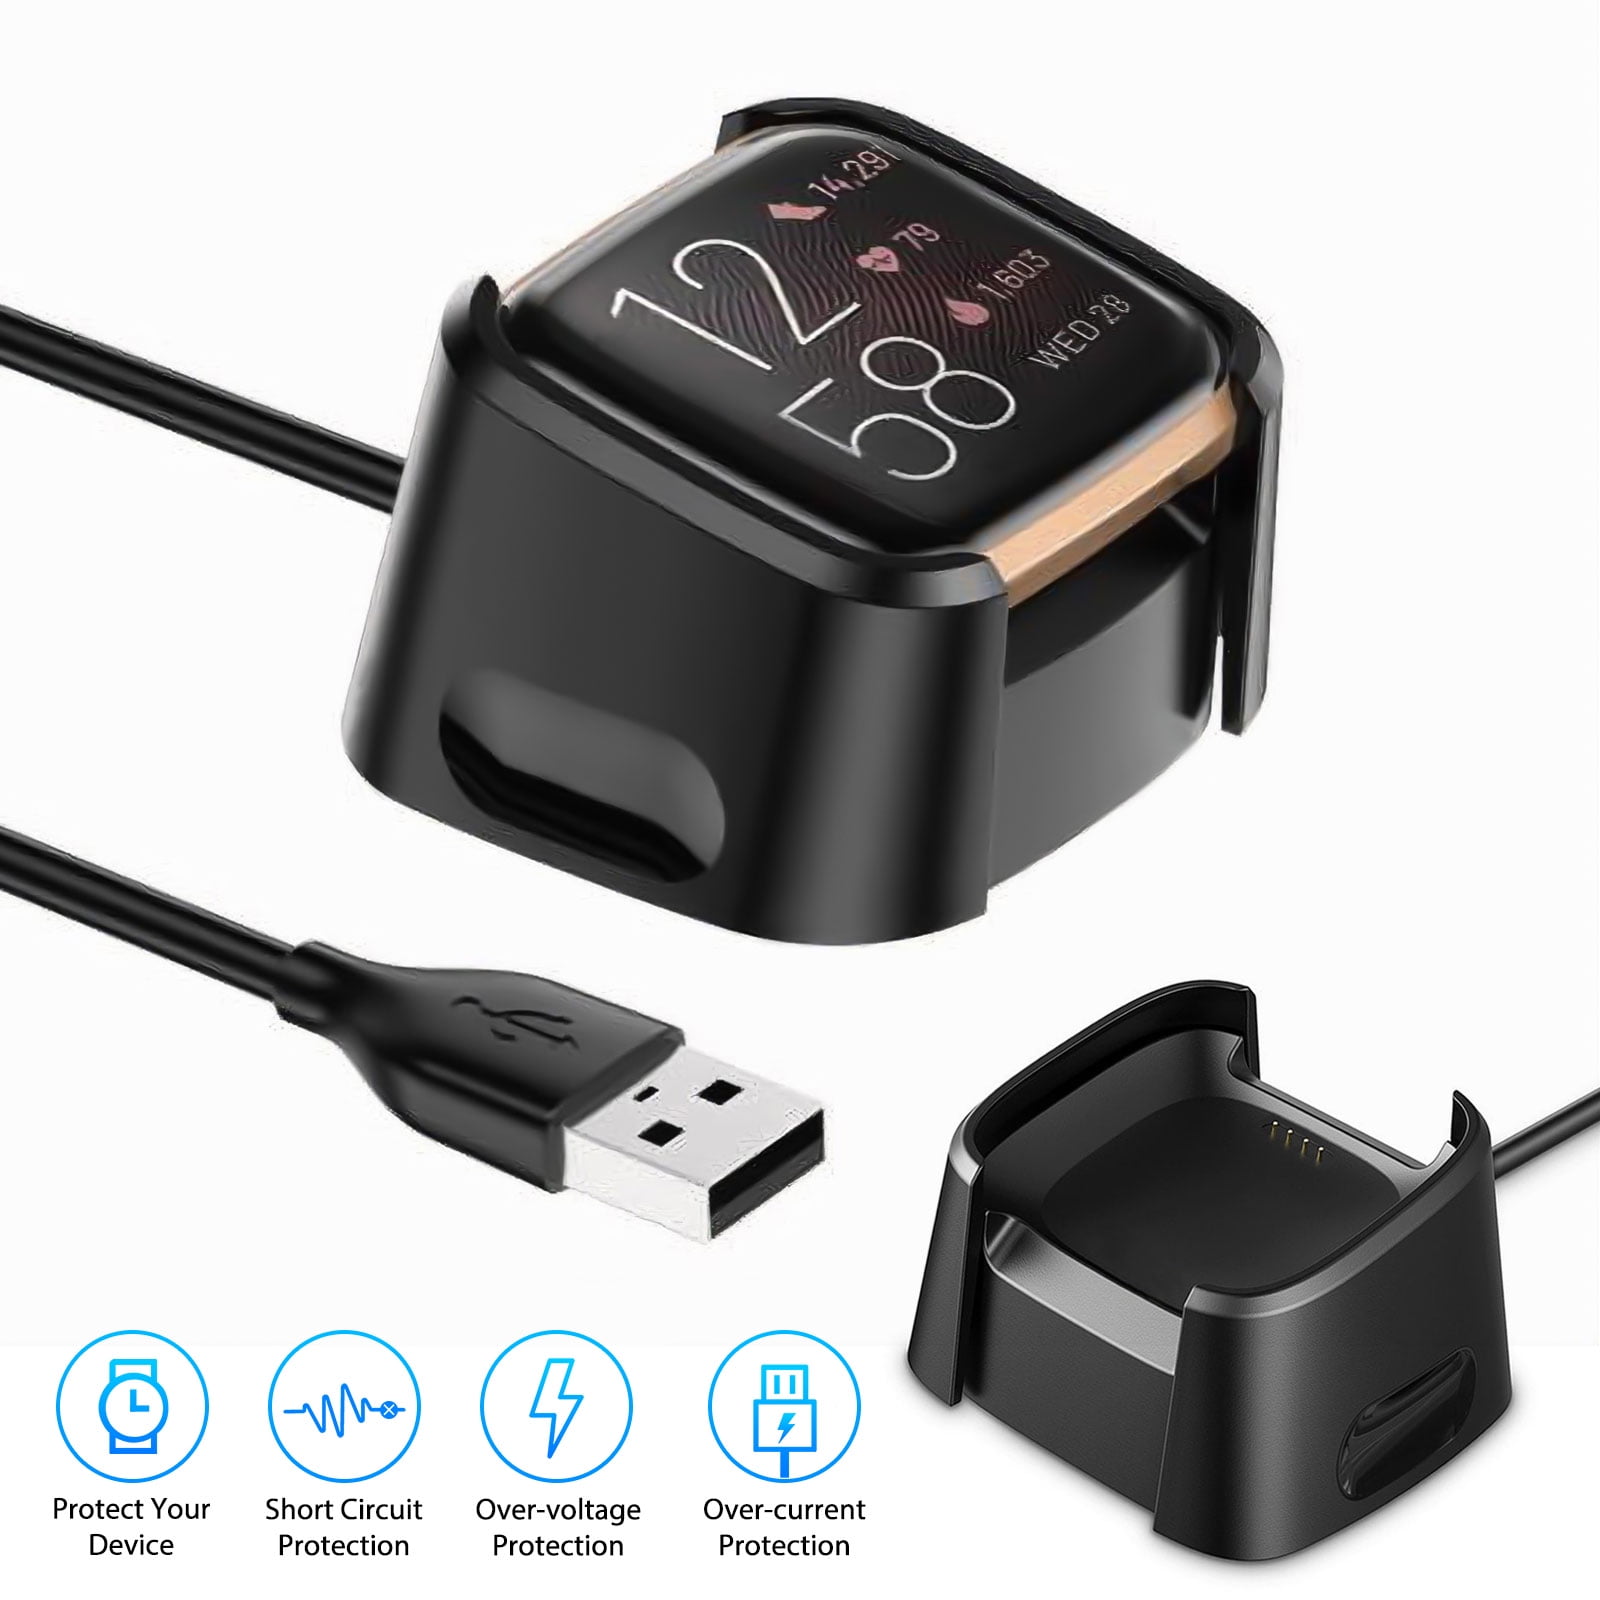 does versa and versa 2 use same charger